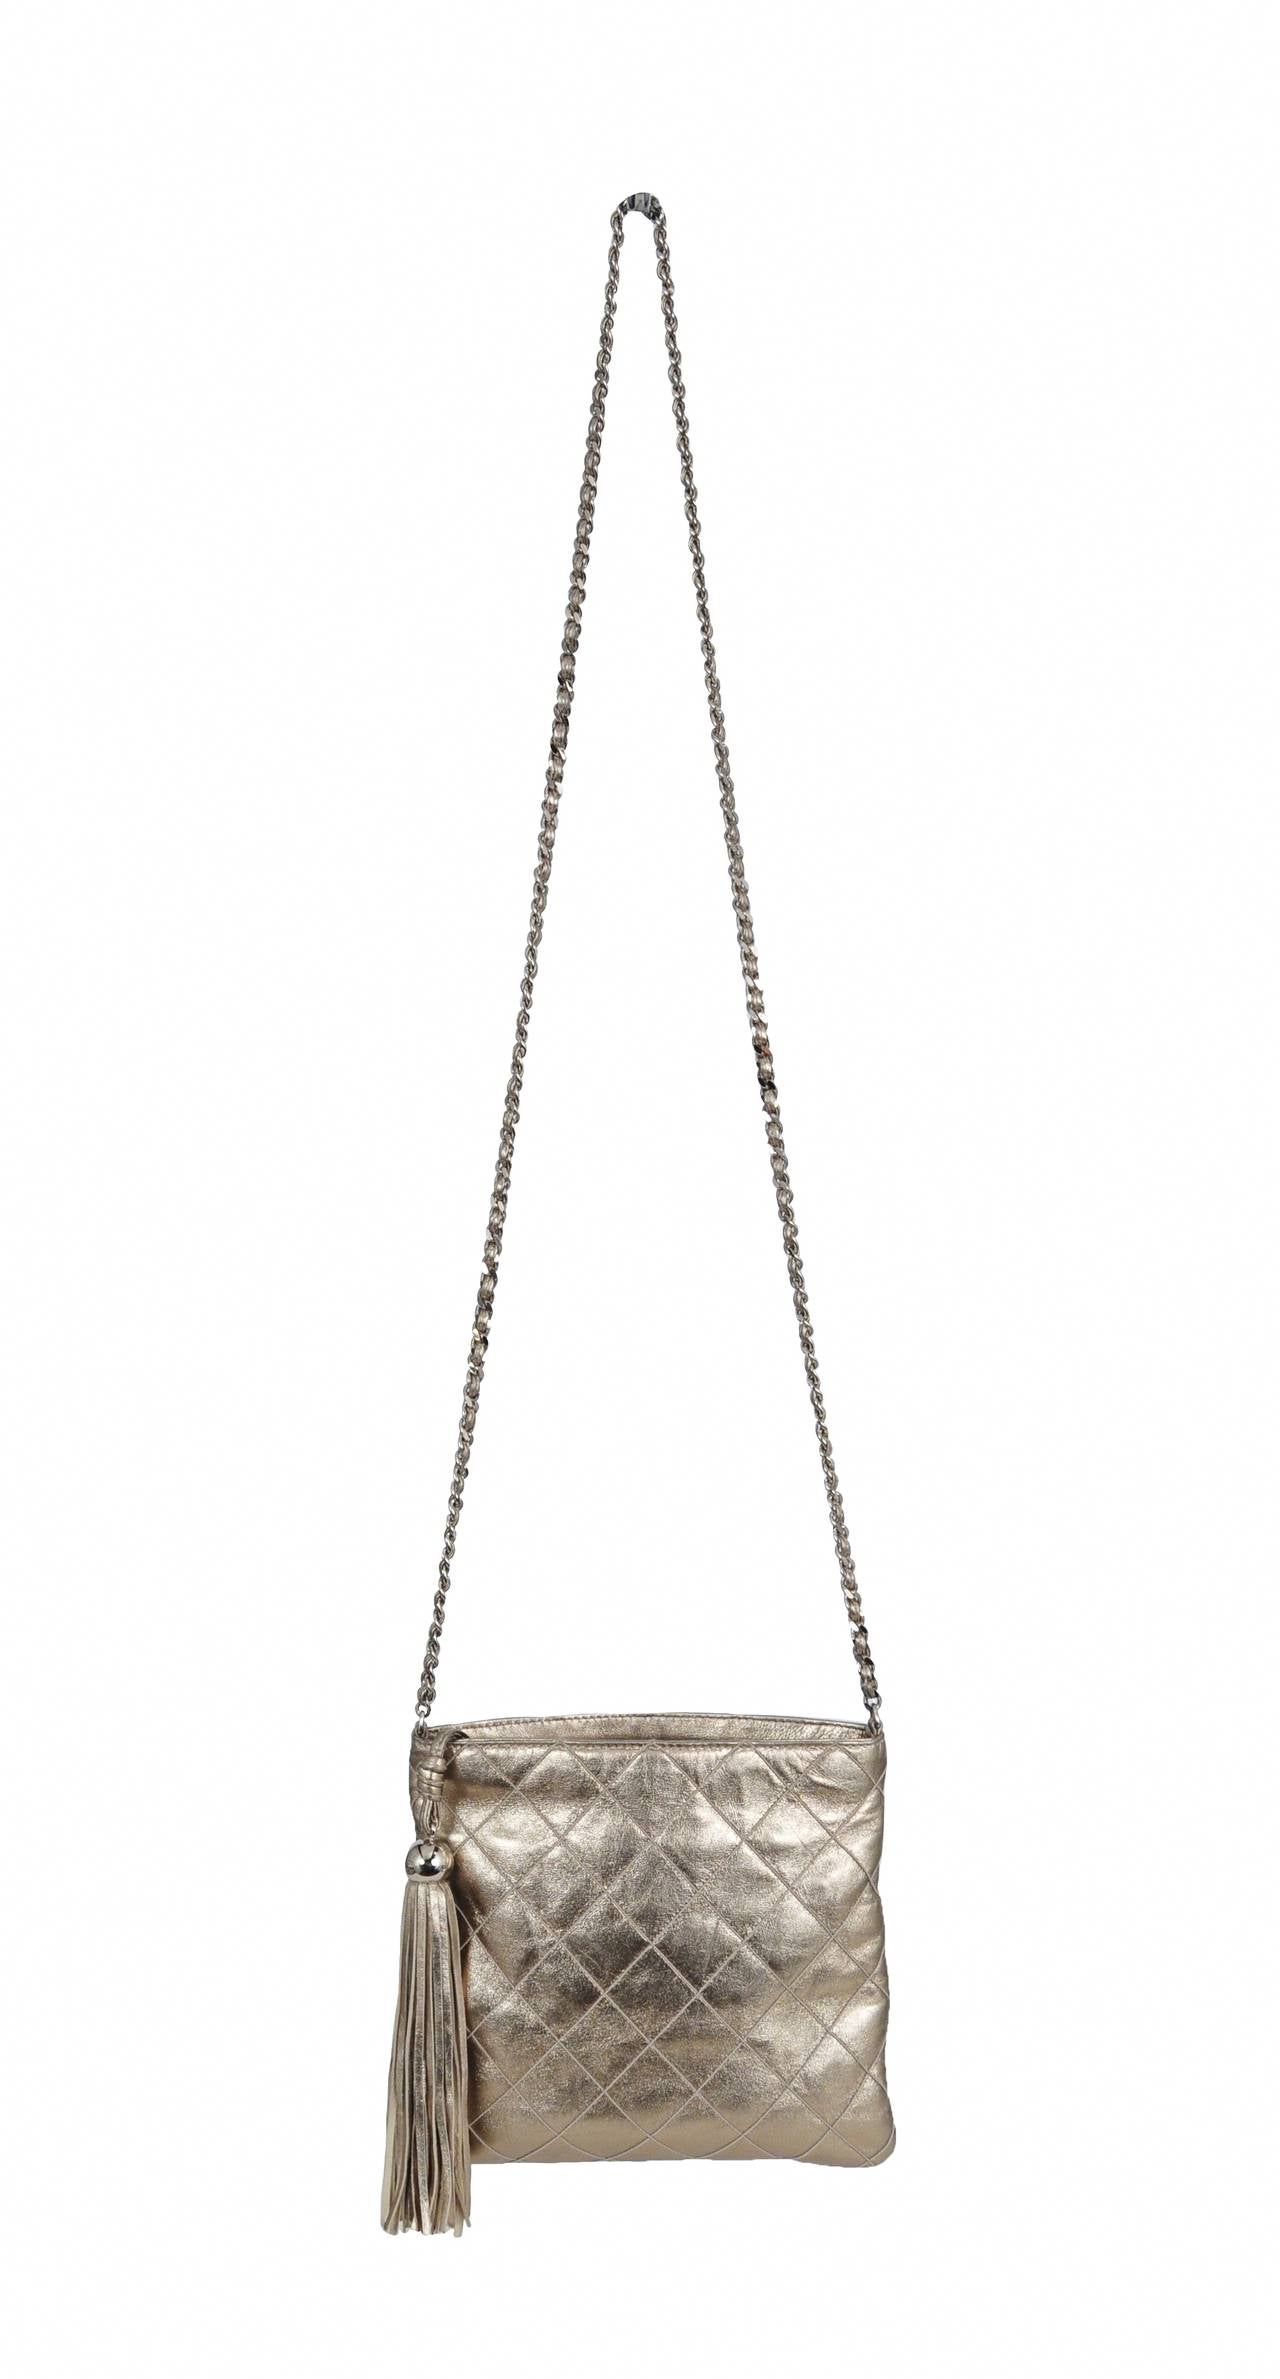 Chanel light gold square cross body bag with extra long tassel and silver braided chain. 

Chain strap is 24